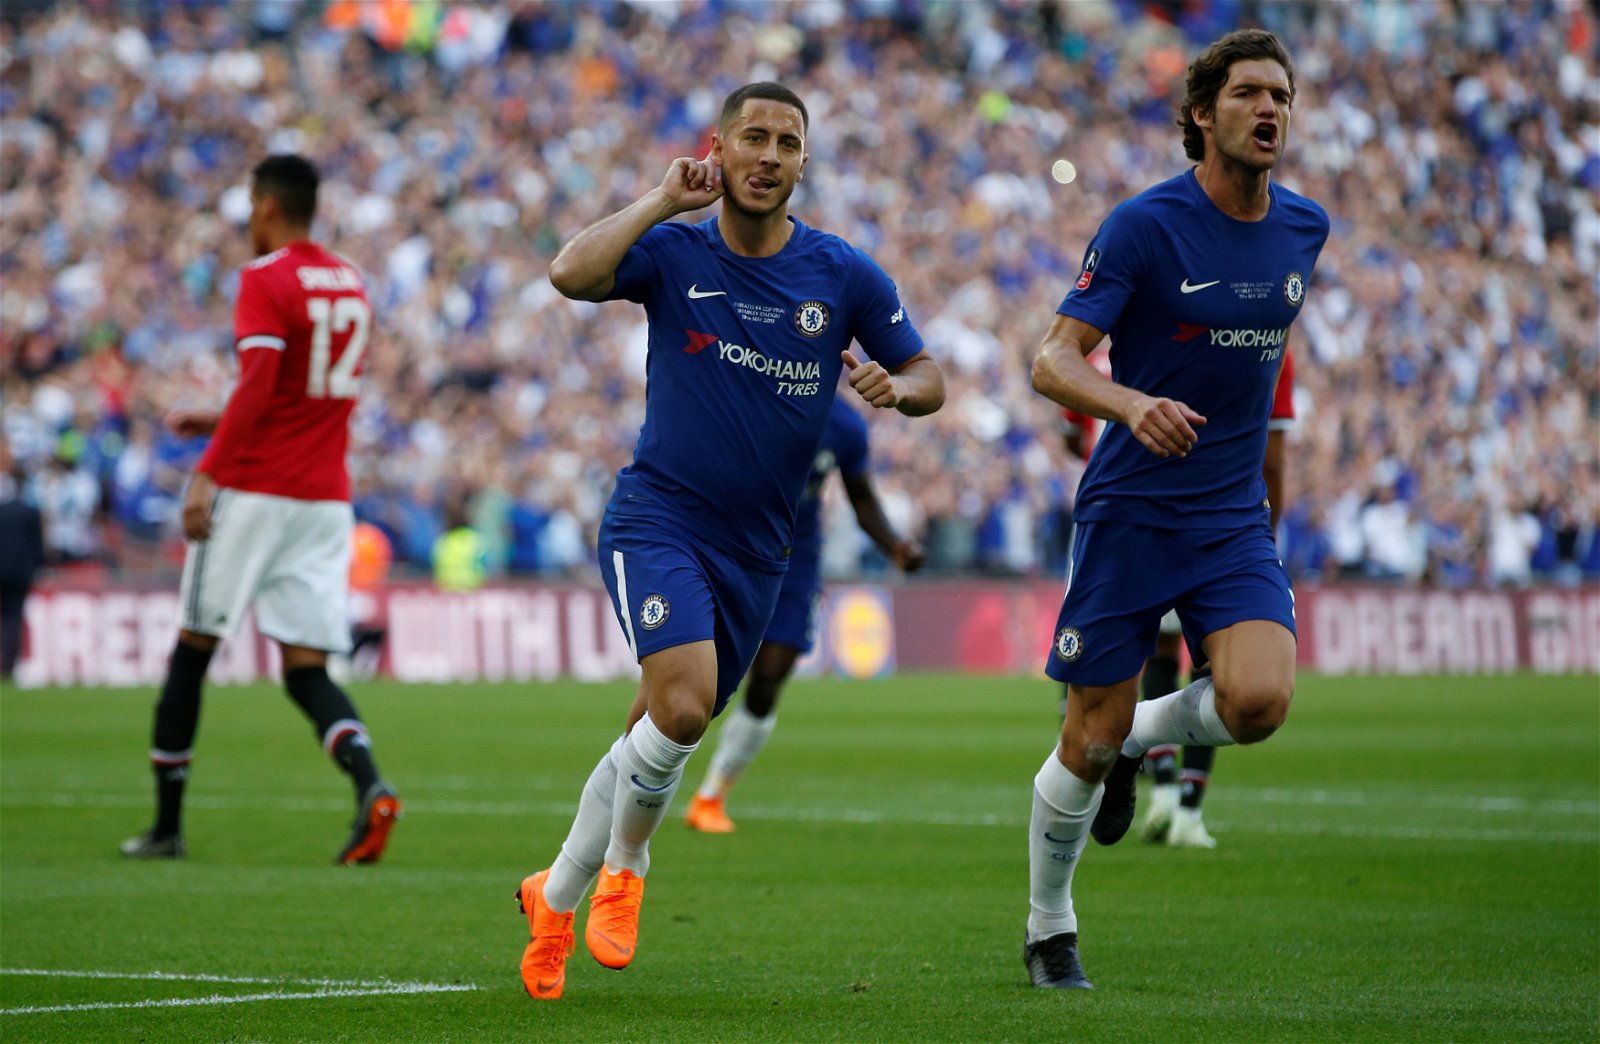 Real Madrid interested in signing Chelsea star